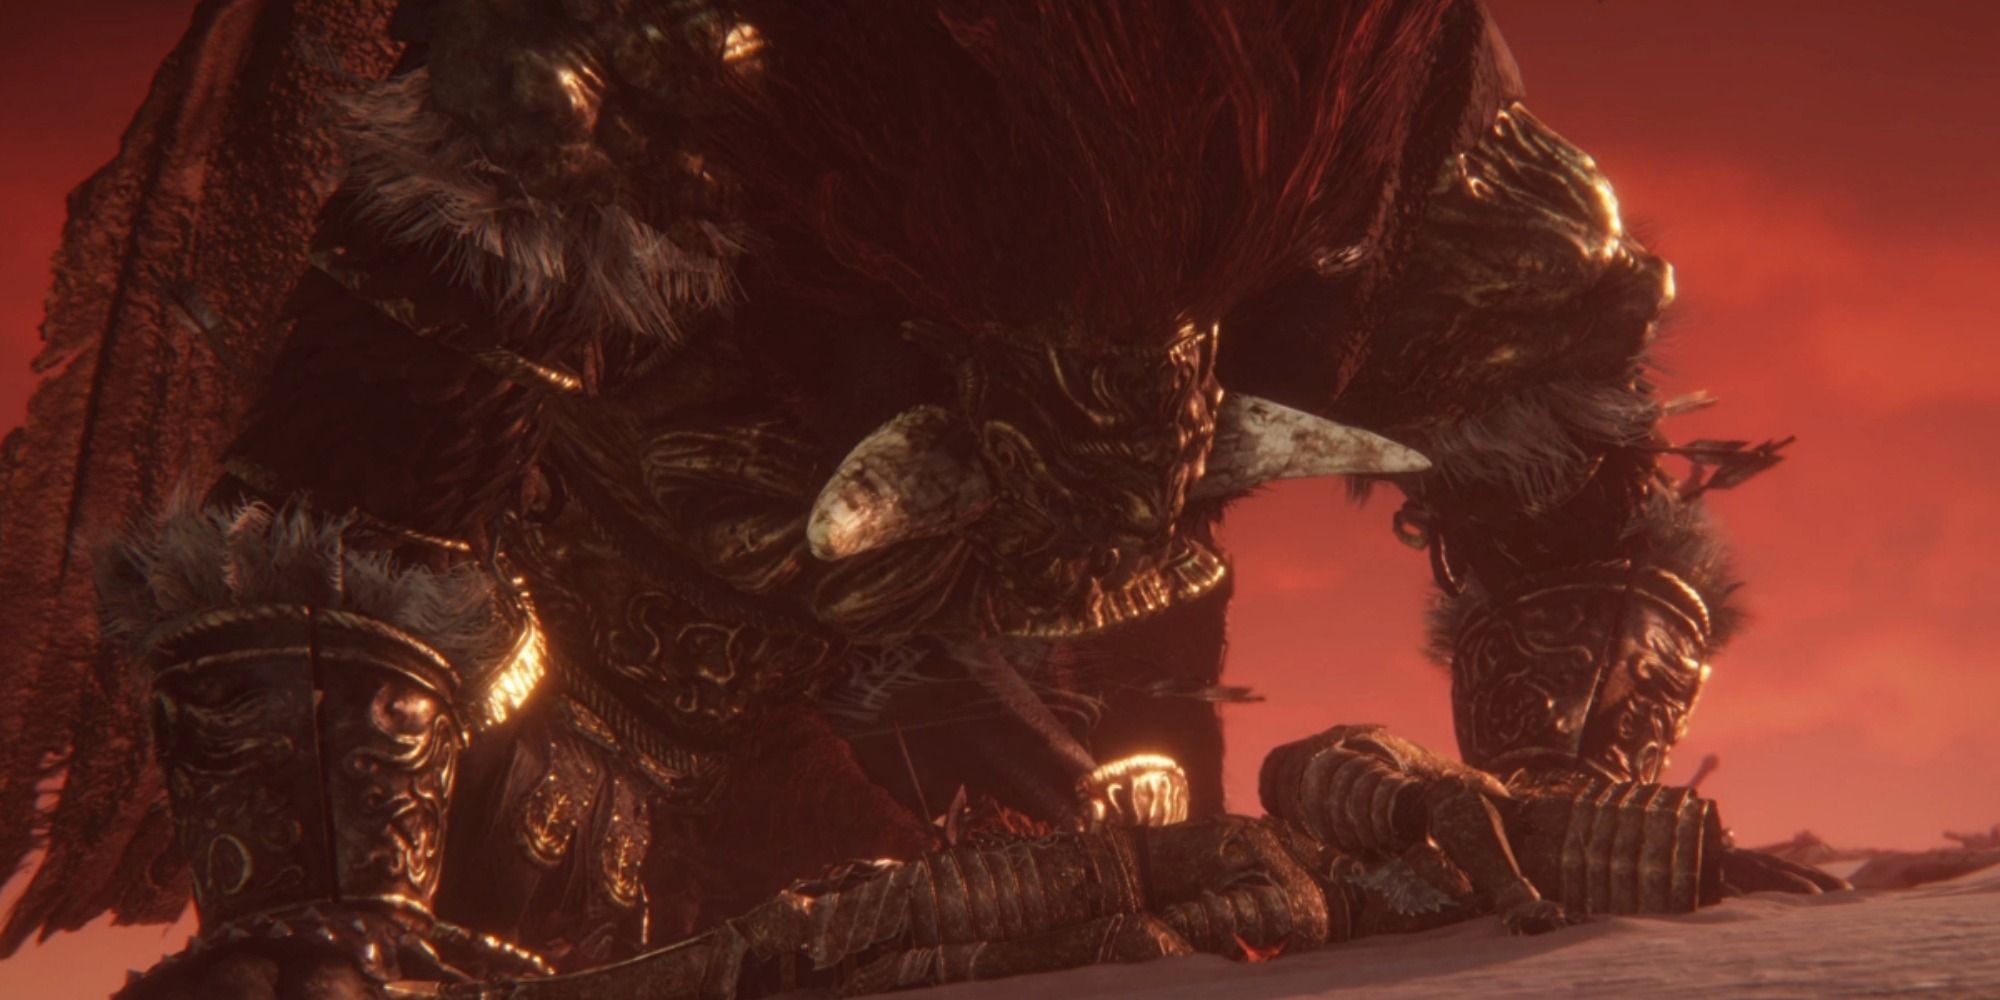 Starscourge Radahn earing a corpse in Elden Ring